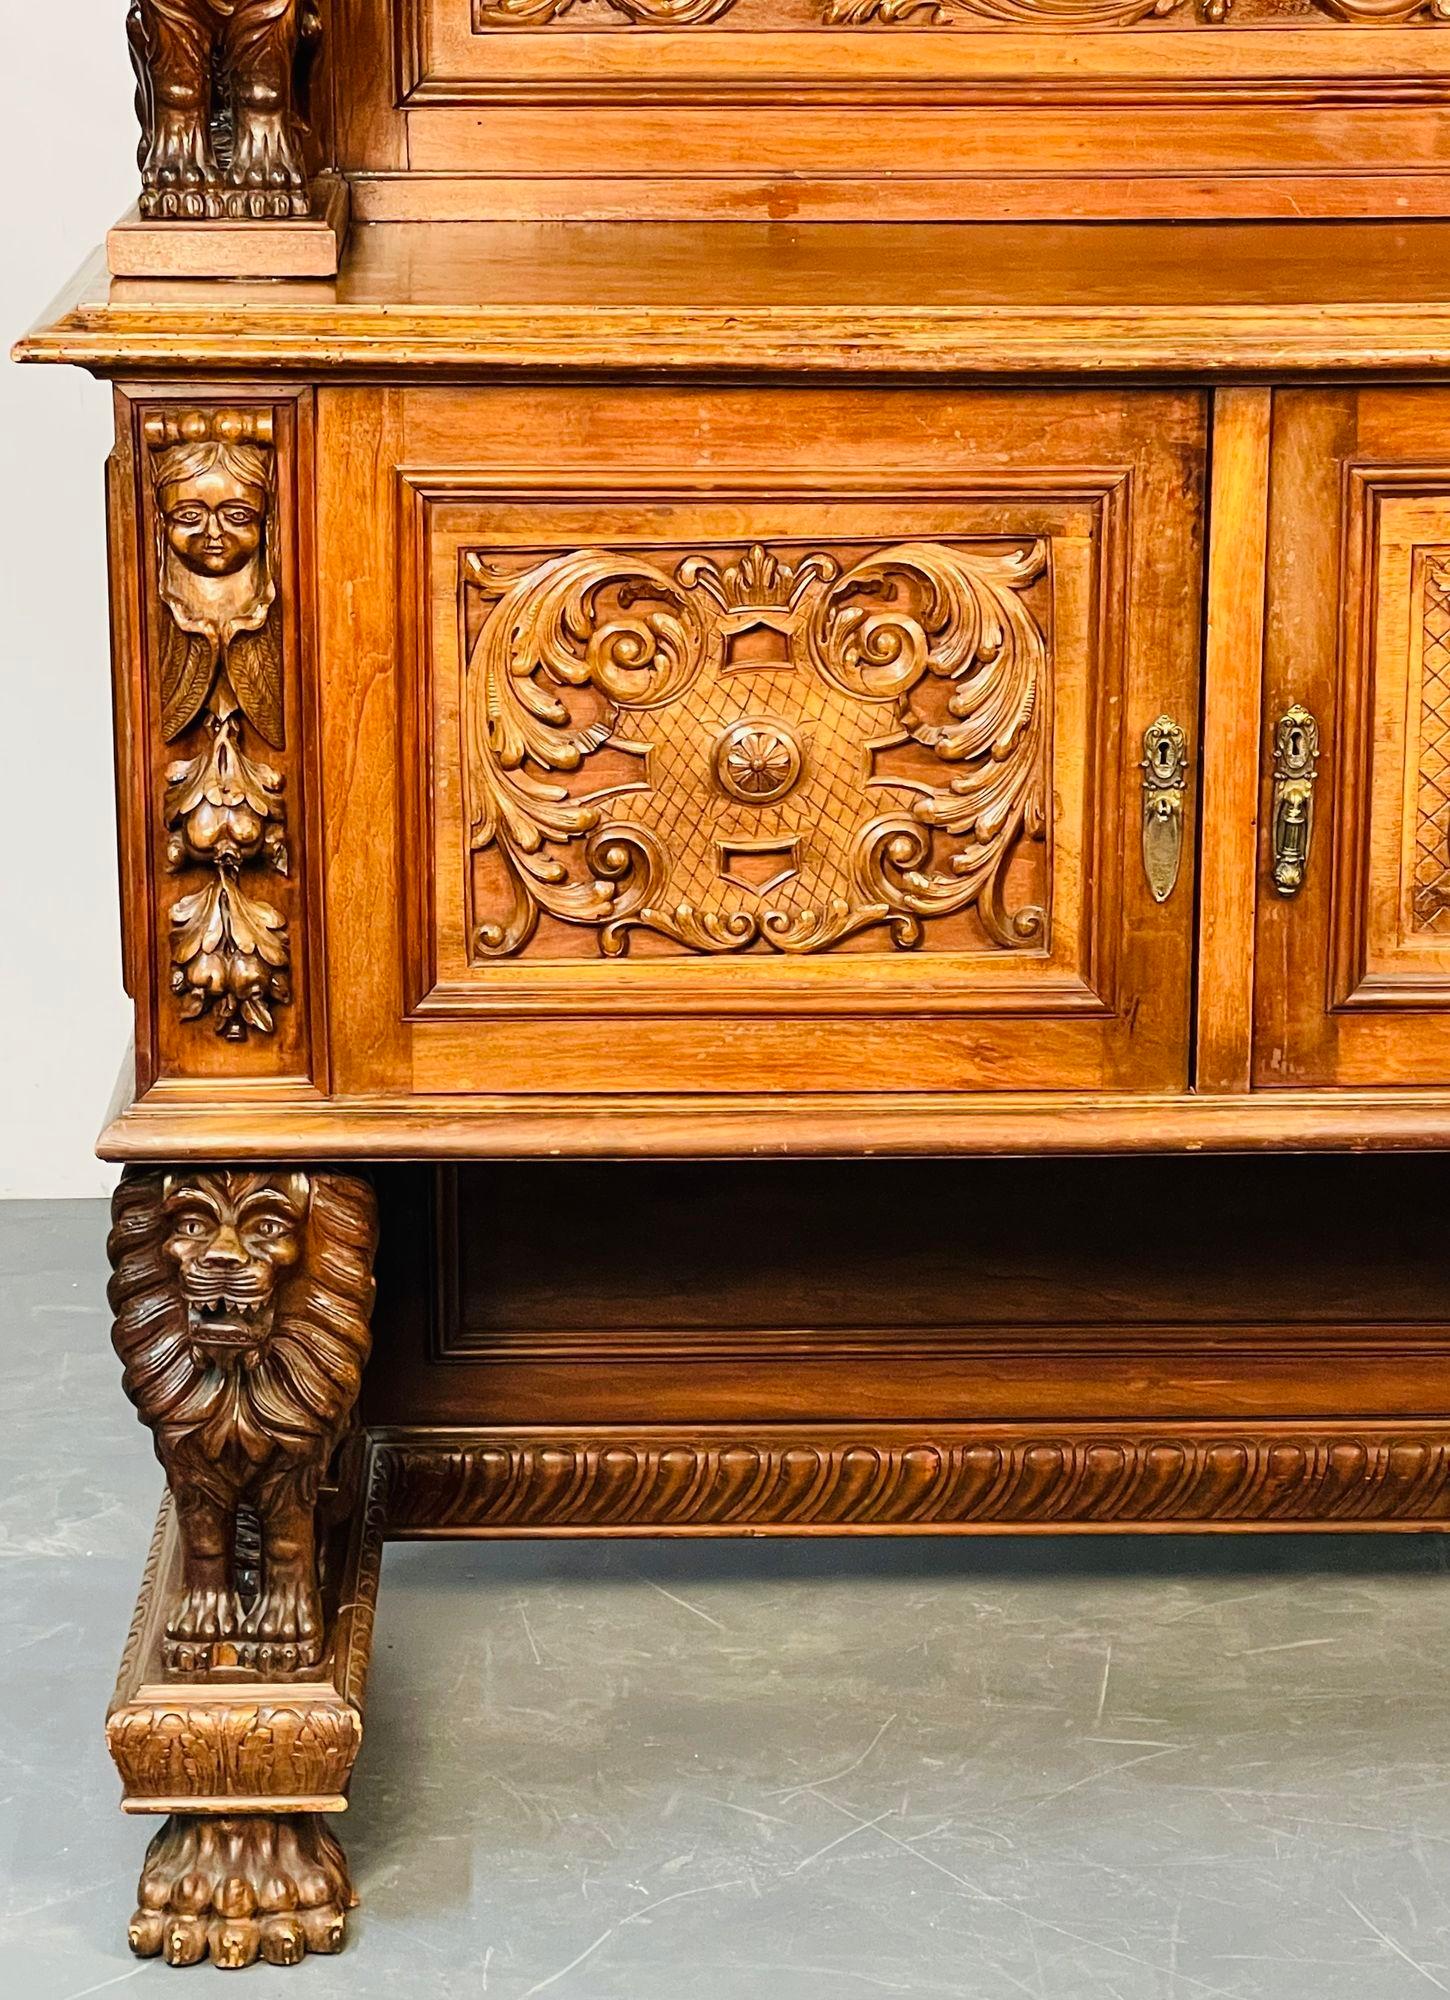 R. J. Horner Victorian Sideboard, Full Lions, Figural, 1880s, Refinished, Monumental in size as it stand almost seven feet high and seven feet wide. Lions measure 14.5 inches in height. 
 
A stunning sideboard having the finest of carving that one